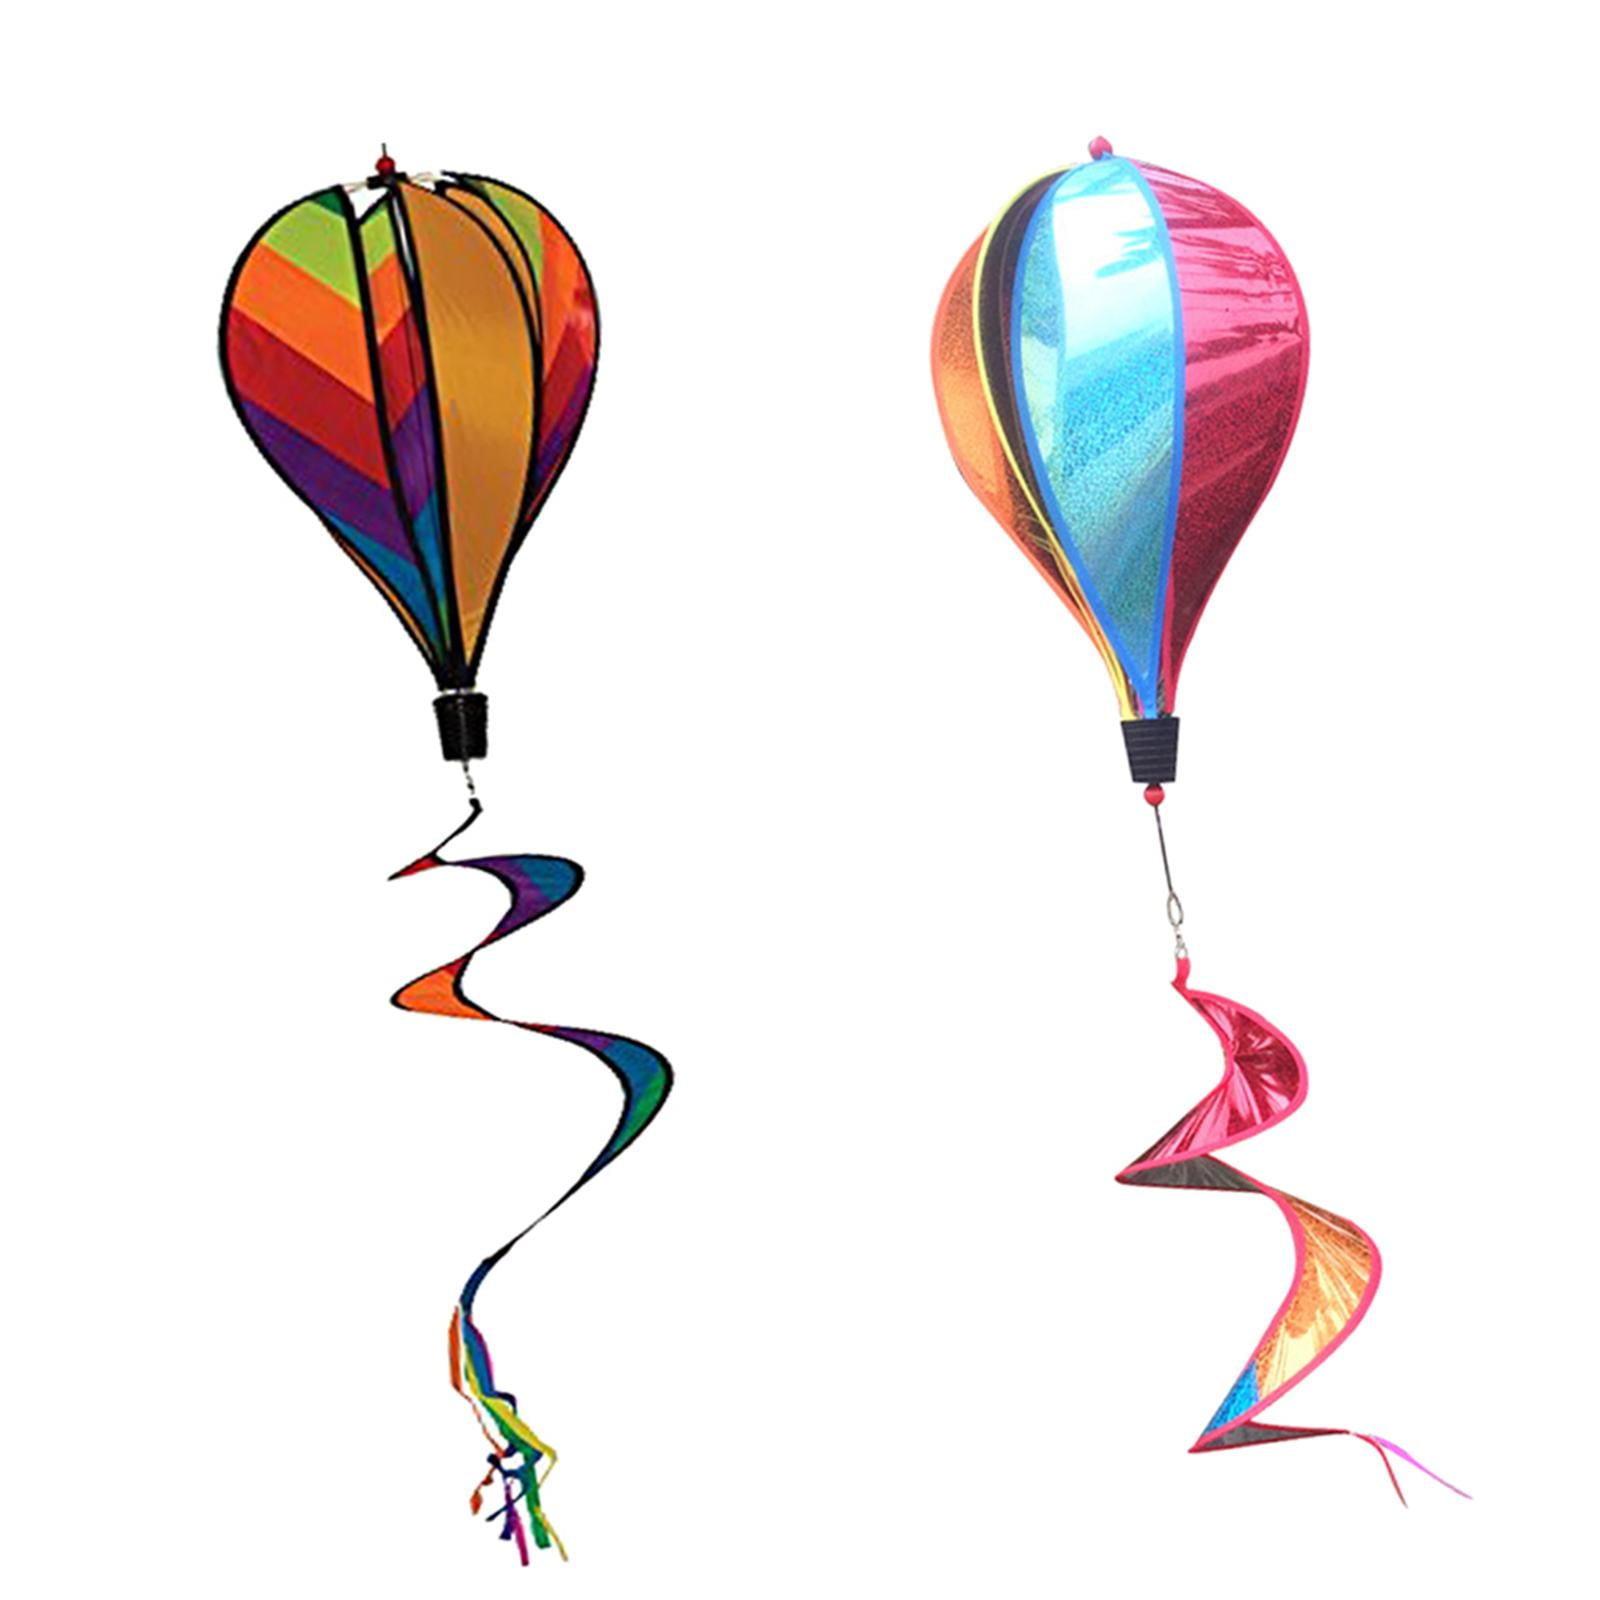 2PCS Hot Air Balloon Colorful Windsock Kites Garden Lawn Decor Outdoor Toy 